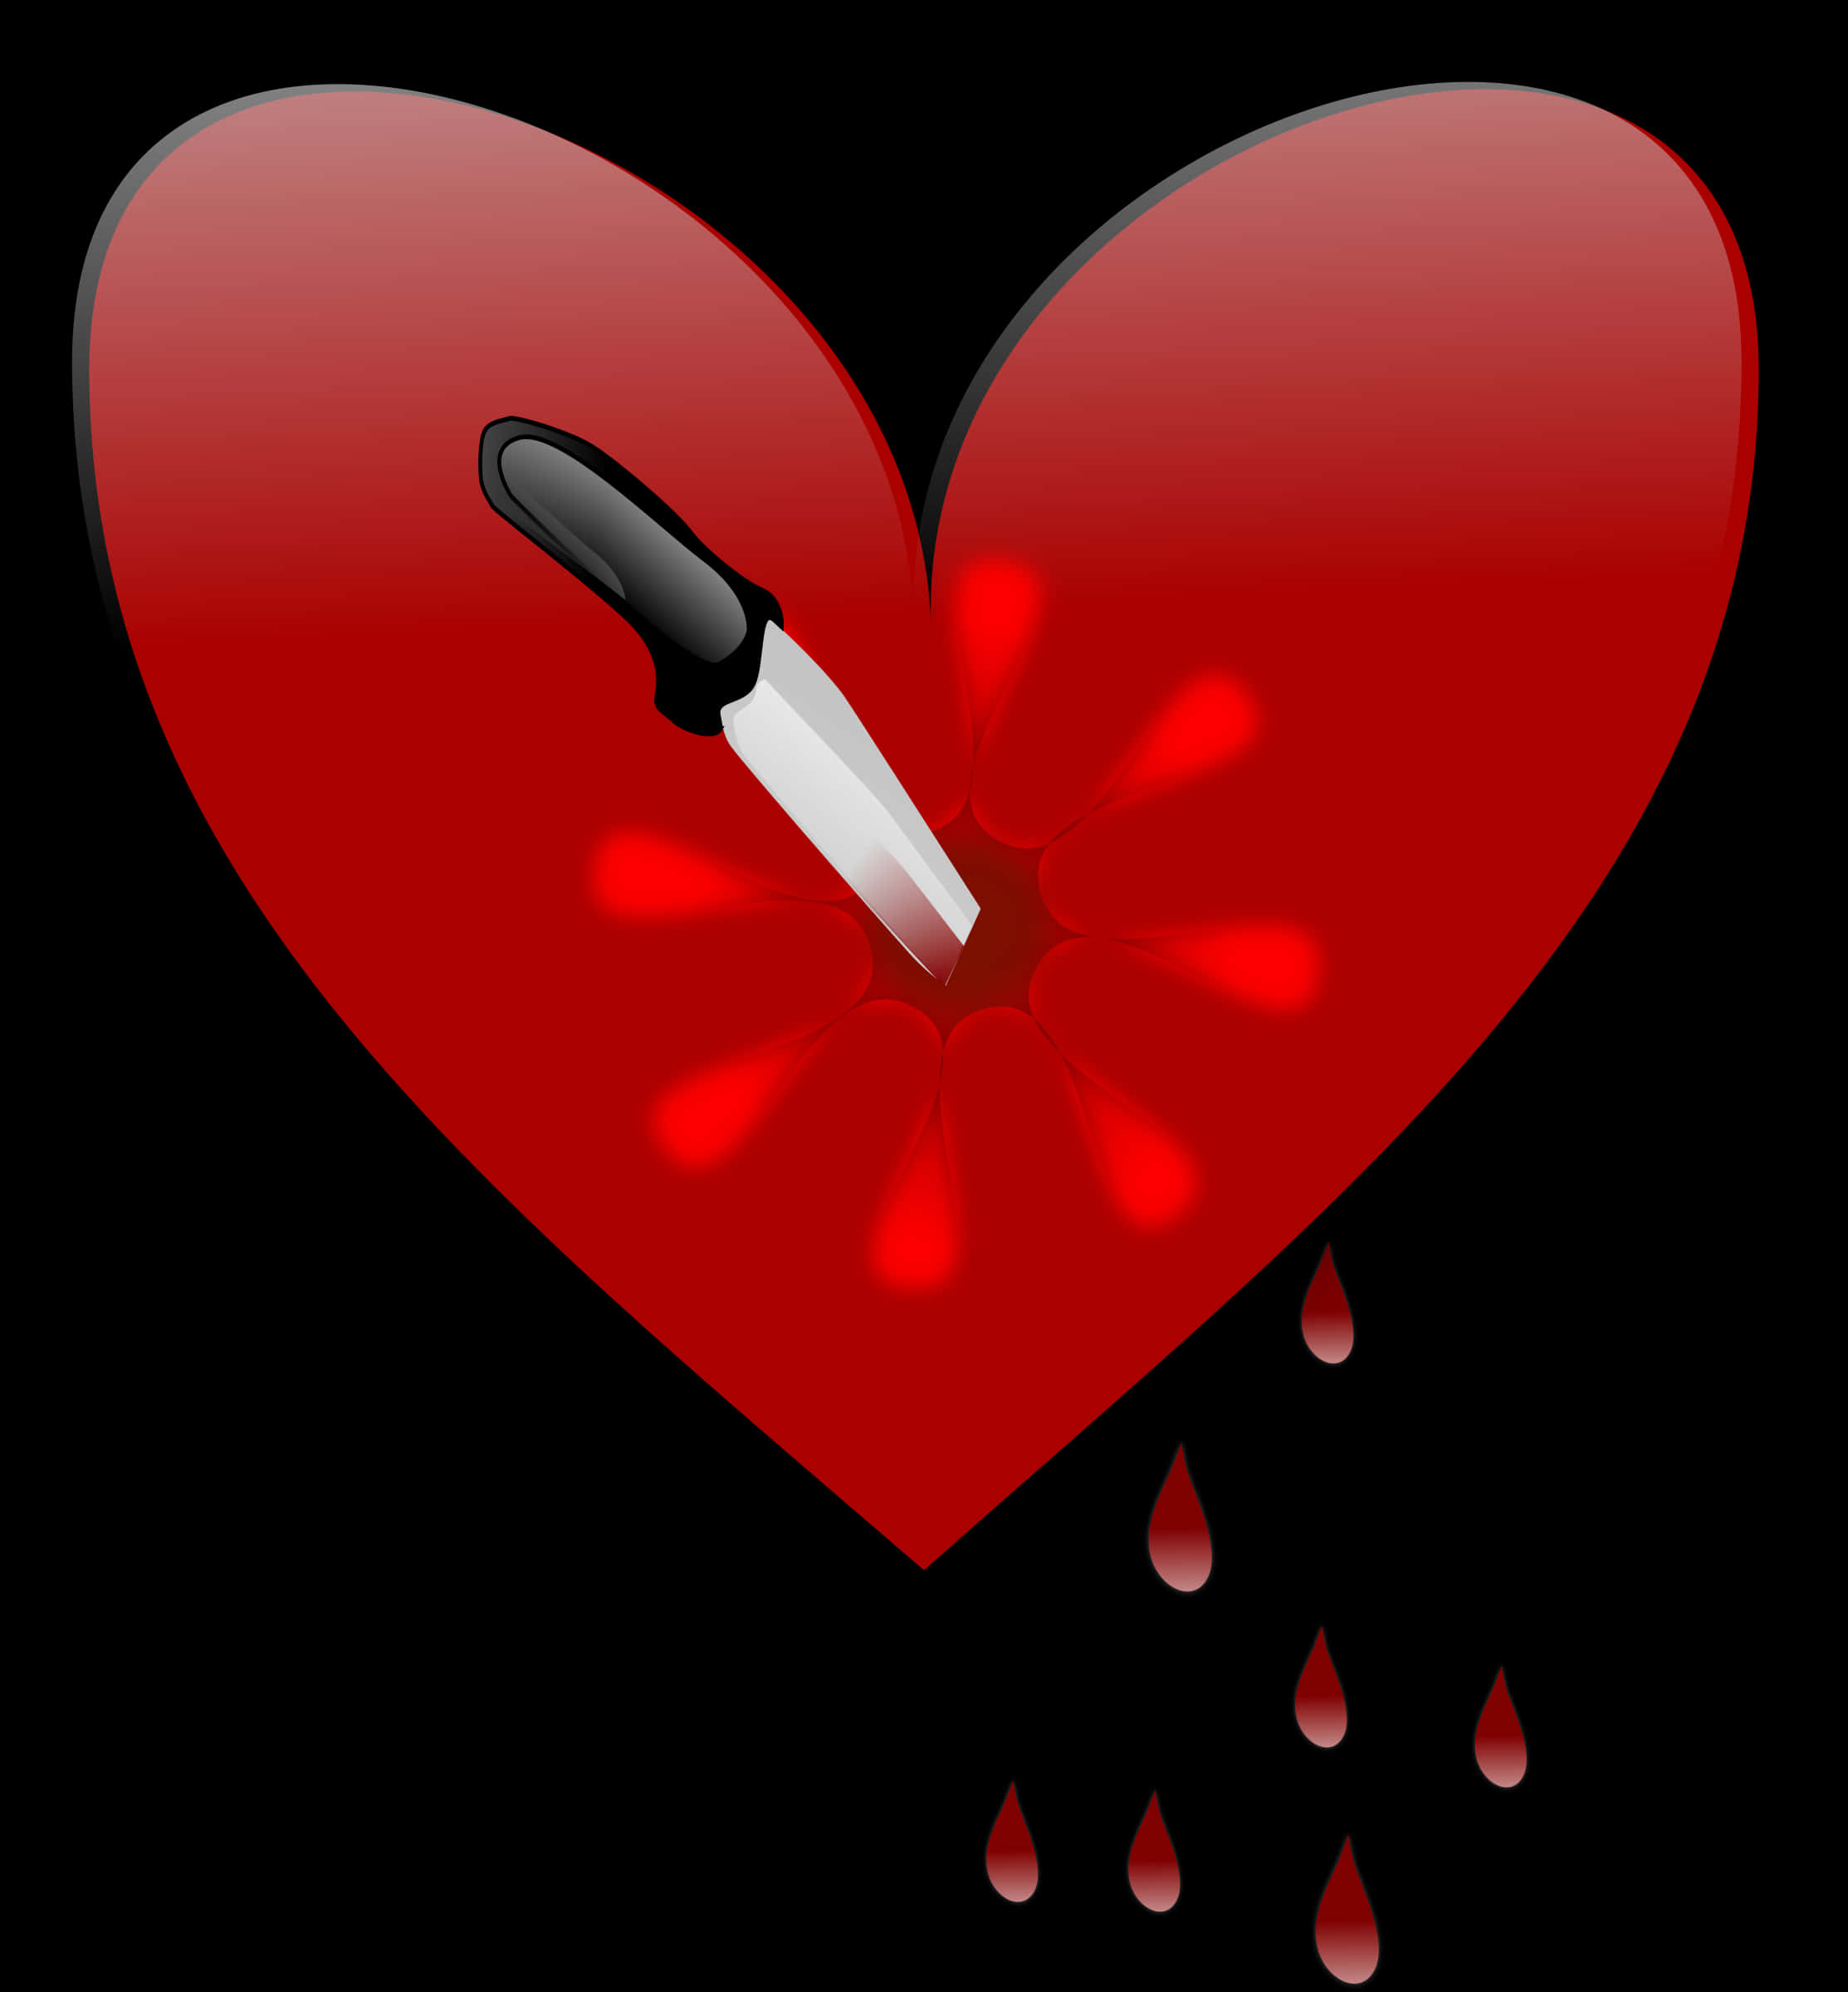 A Knife In A Heart